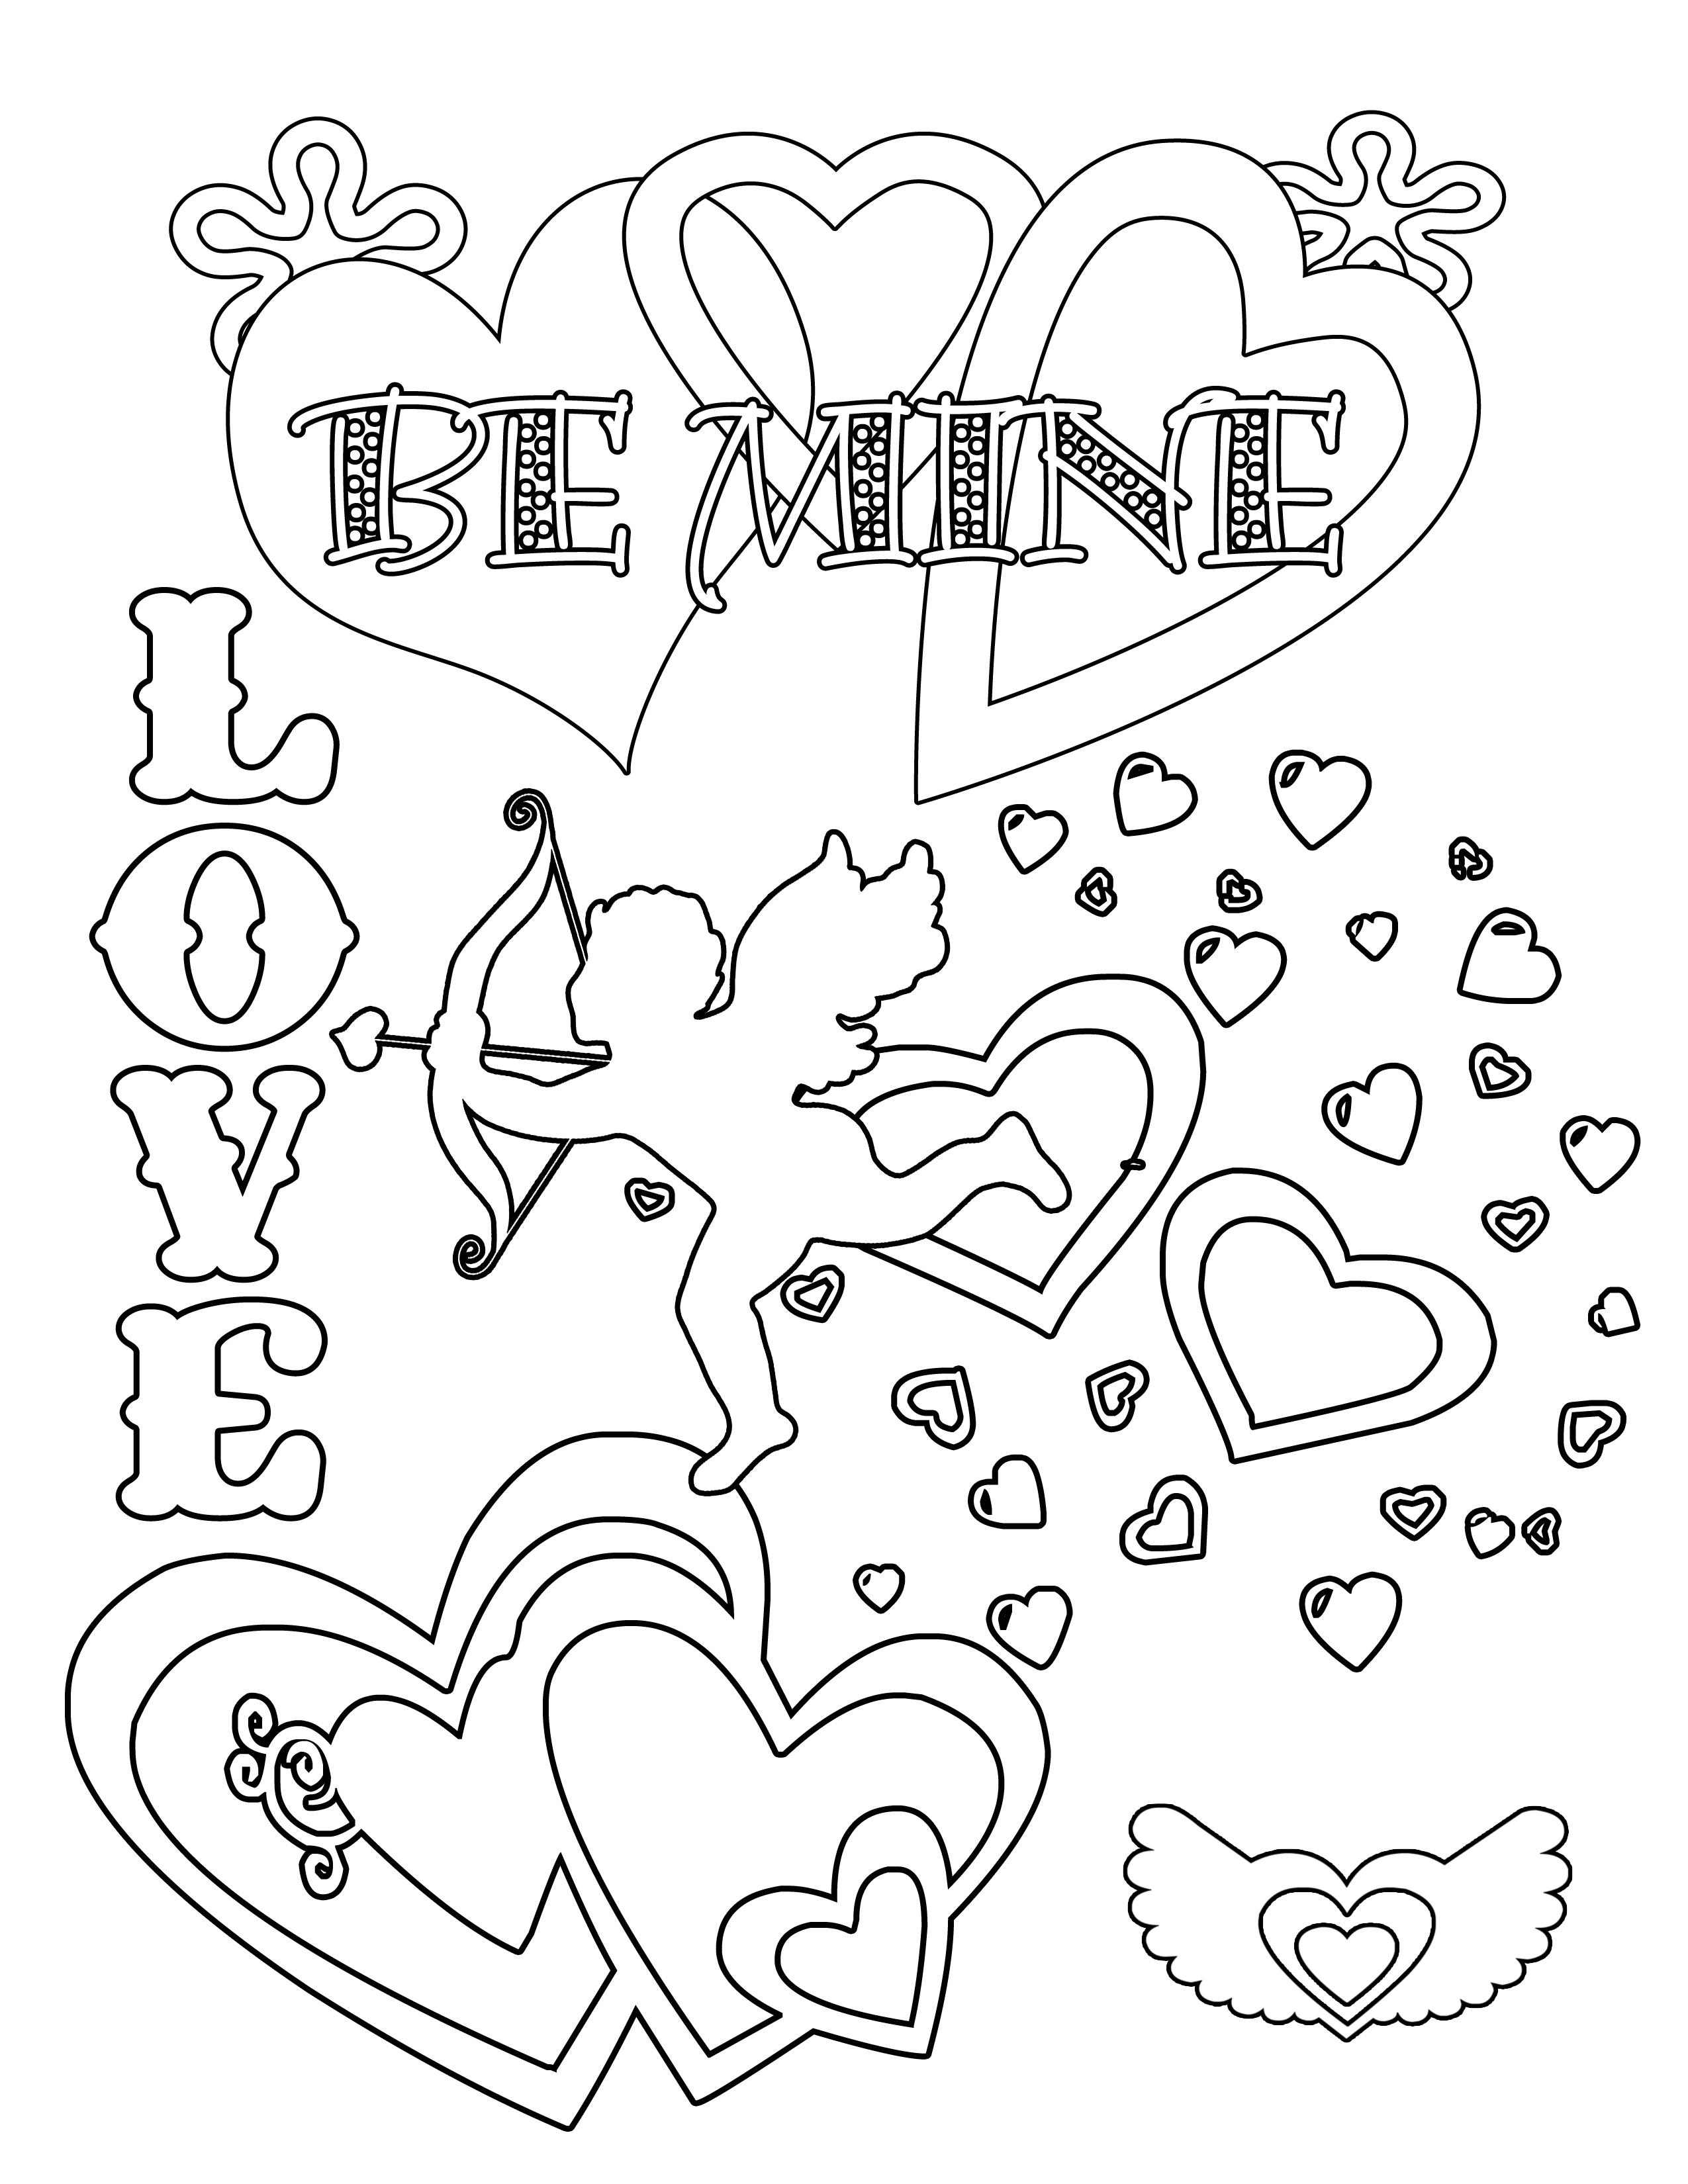 Valentine Coloring Pages Best Coloring Pages For Kids Coloring Wallpapers Download Free Images Wallpaper [coloring436.blogspot.com]